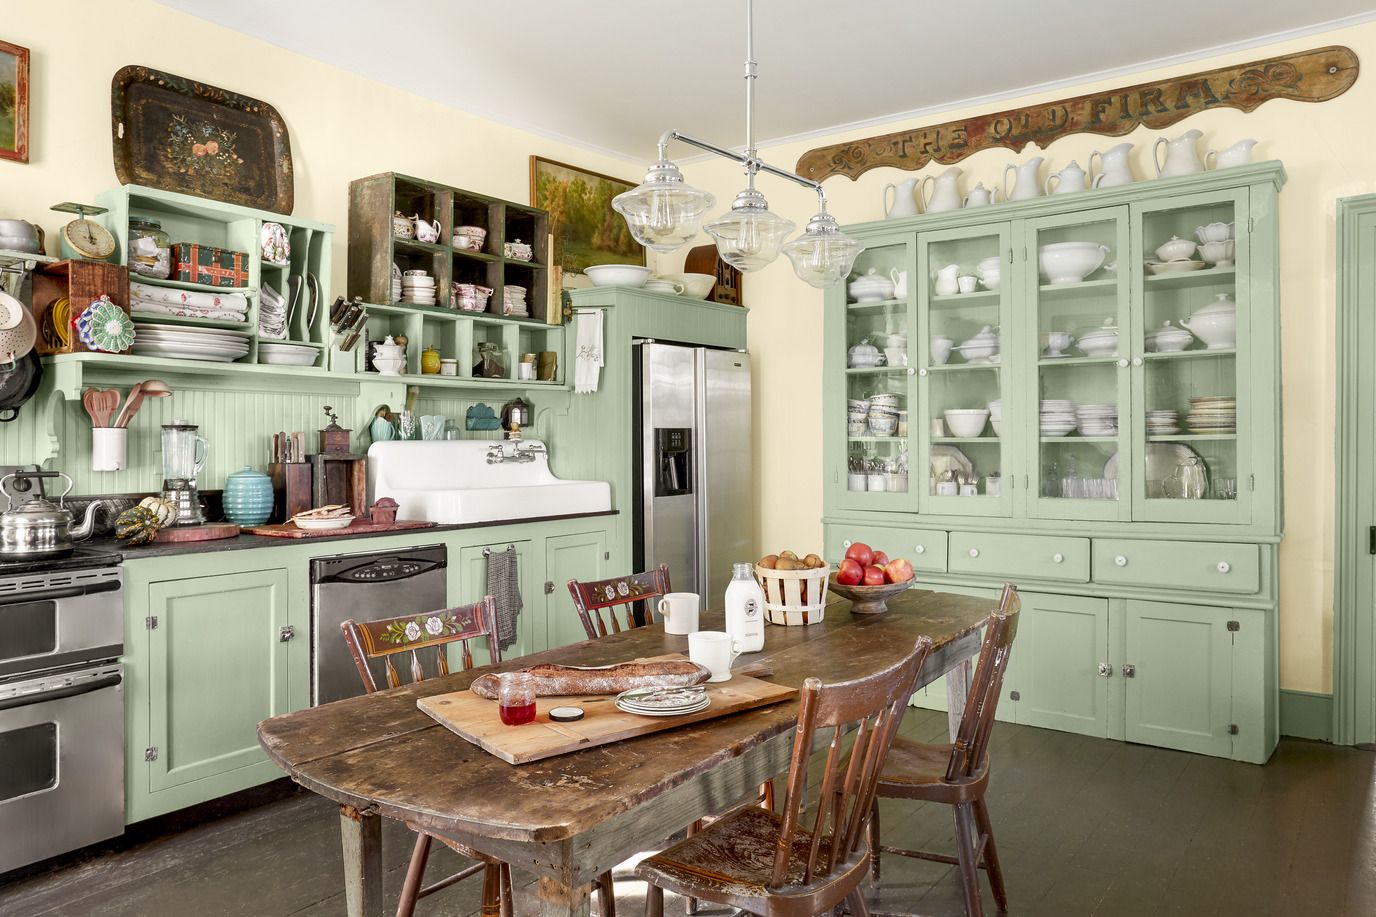 green paint color kitchen cabinet ideas for small kitchens